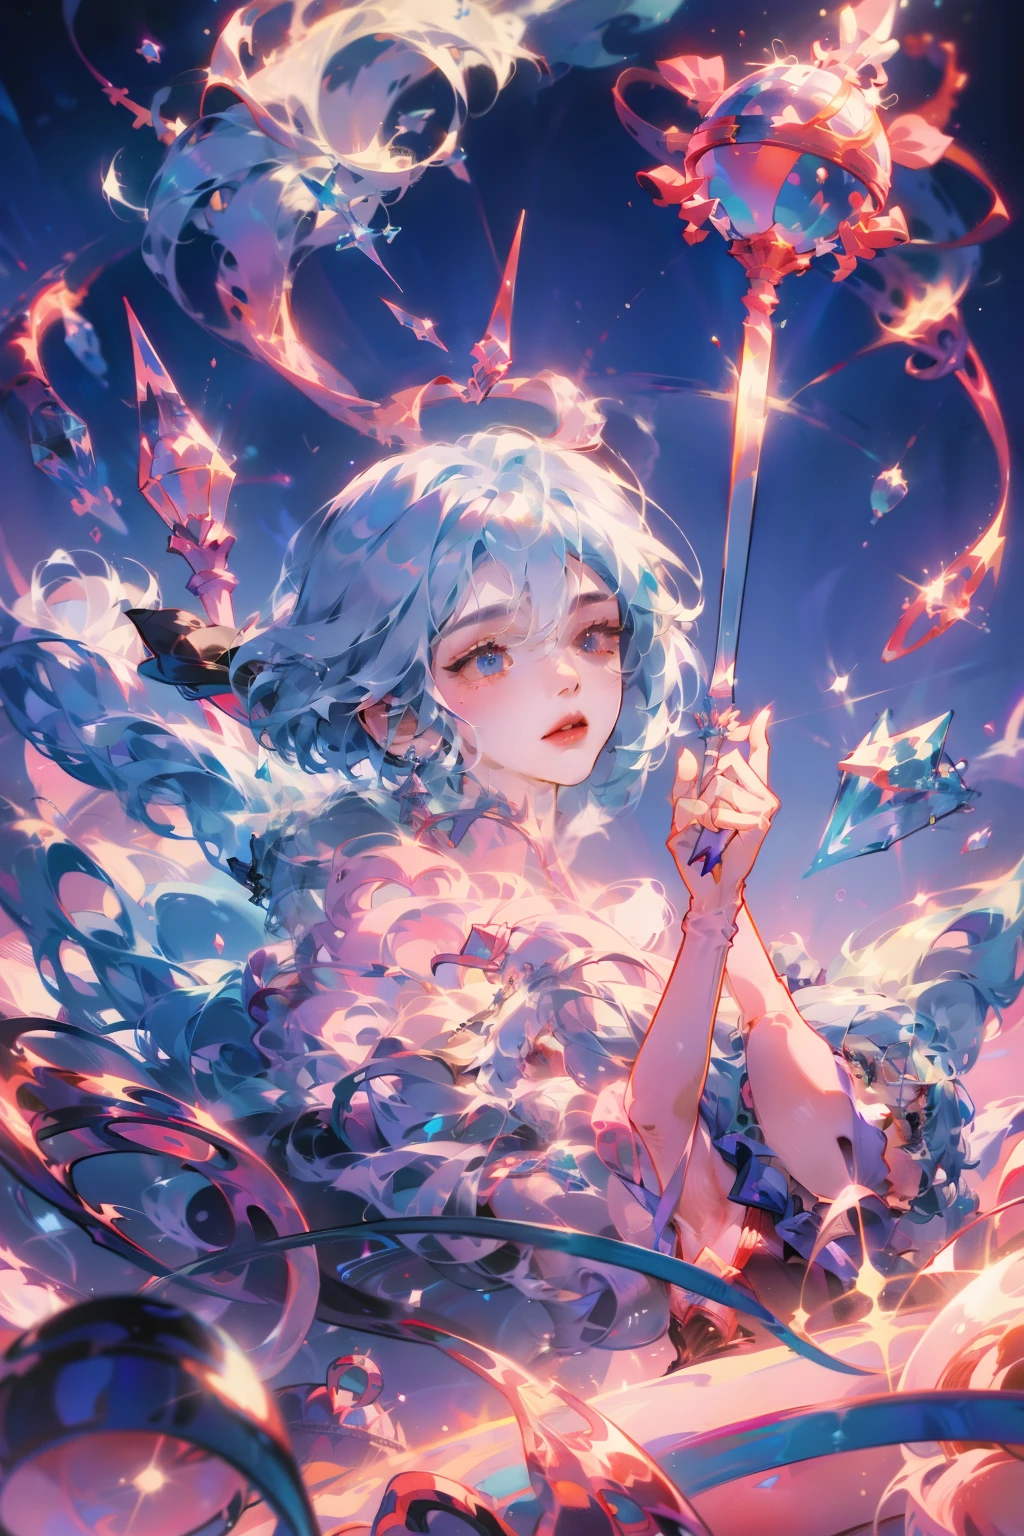 Anime - style illustration of a woman with a magic wand and a crystal ball, white-haired god, Keqing from Genshin Impact, Mago da Terra Feminino,